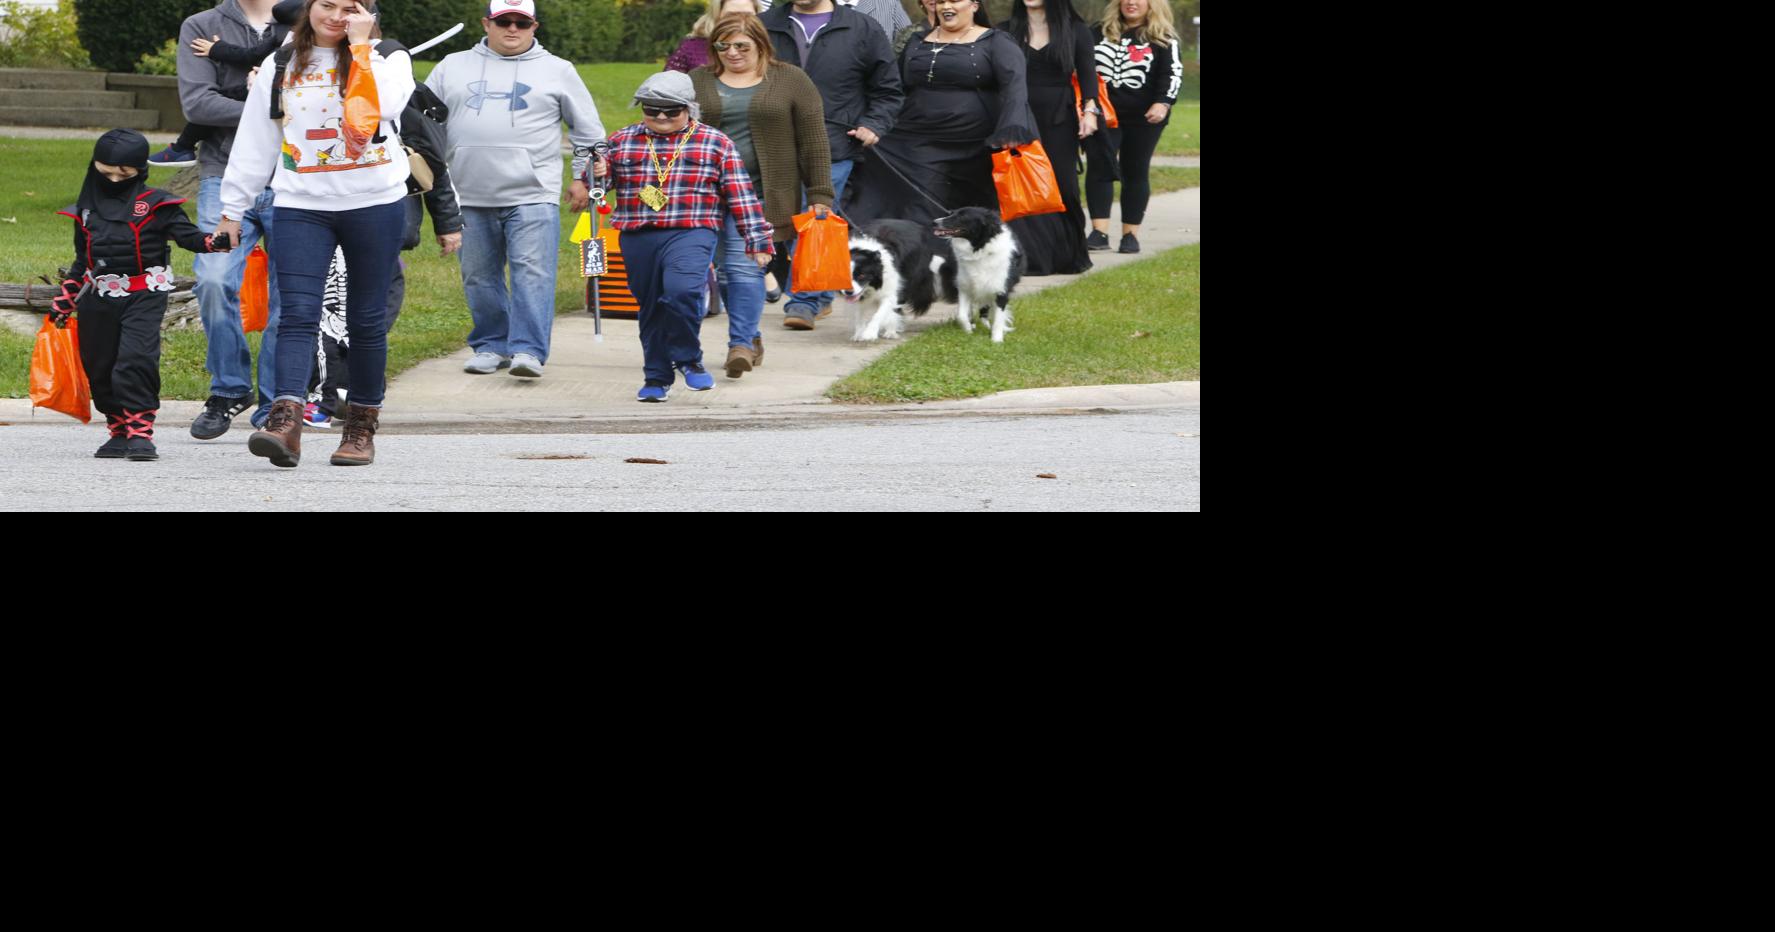 Is it safe to trick or treat amid the coronavirus pandemic? A NWI